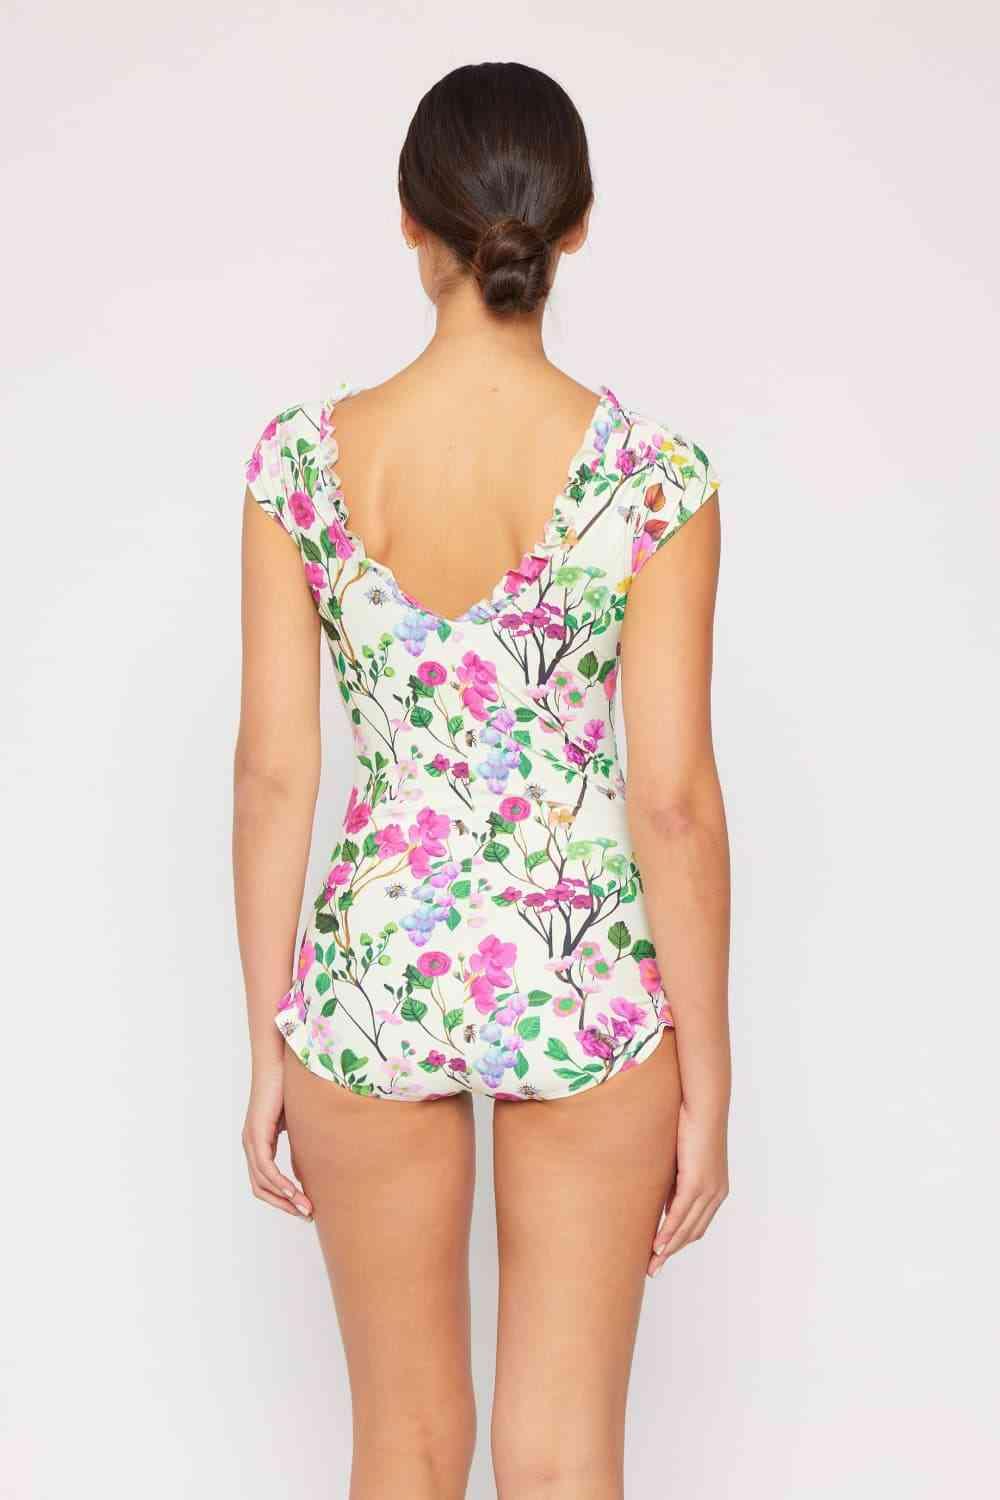 Marina West Swim Bring Me Flowers V-Neck One Piece Swimsuit Cherry Blossom Cream - God's Girl Gifts And Apparel